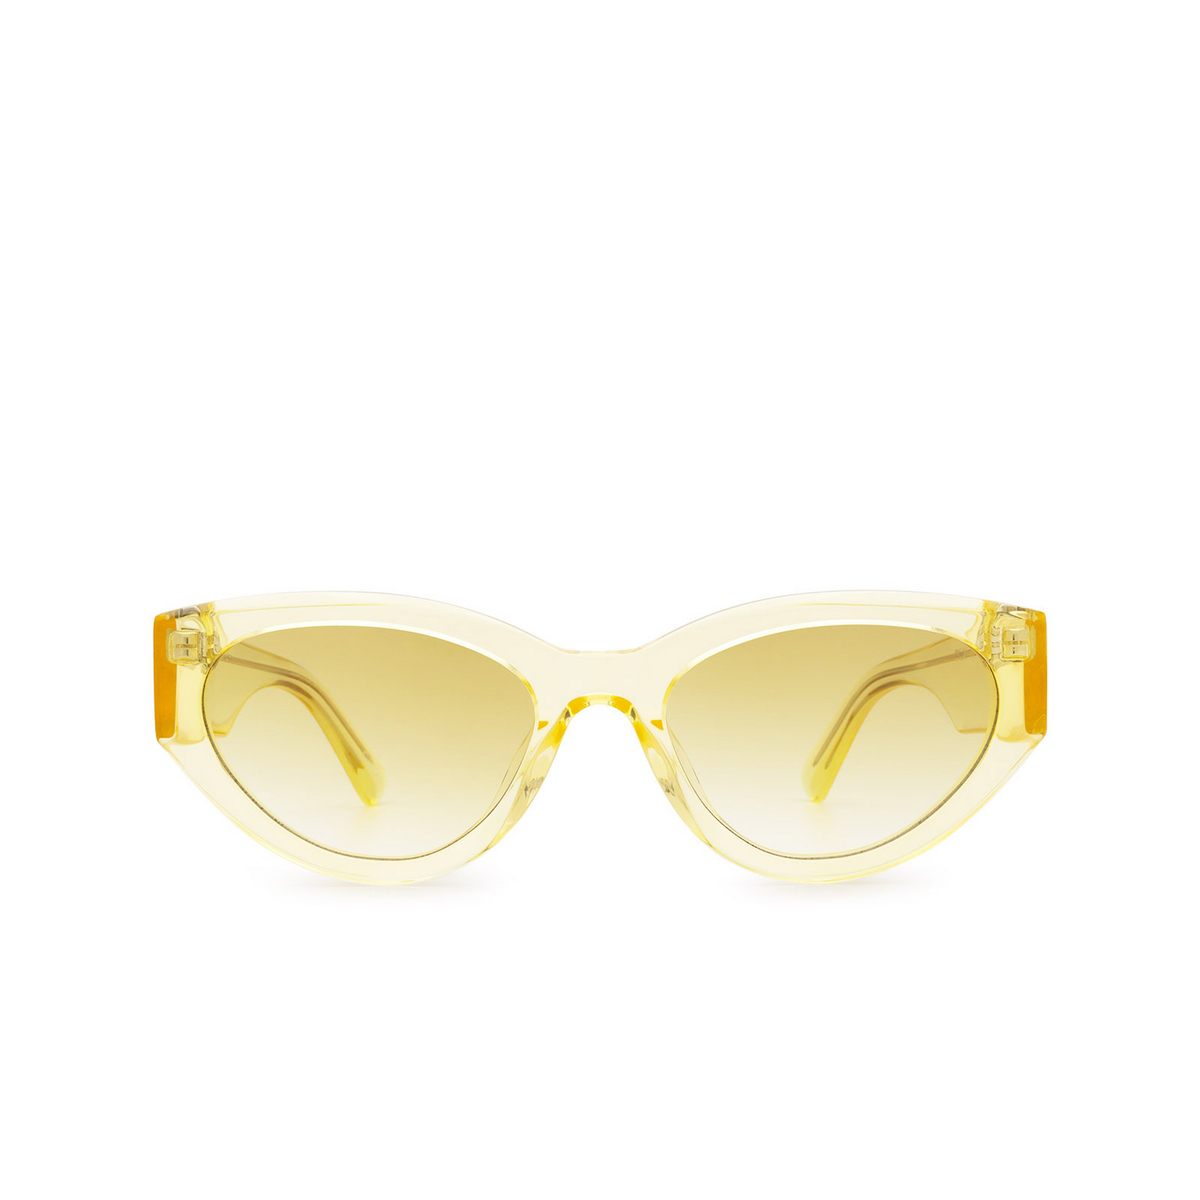 Chimi 06 Sunglasses YELLOW - front view